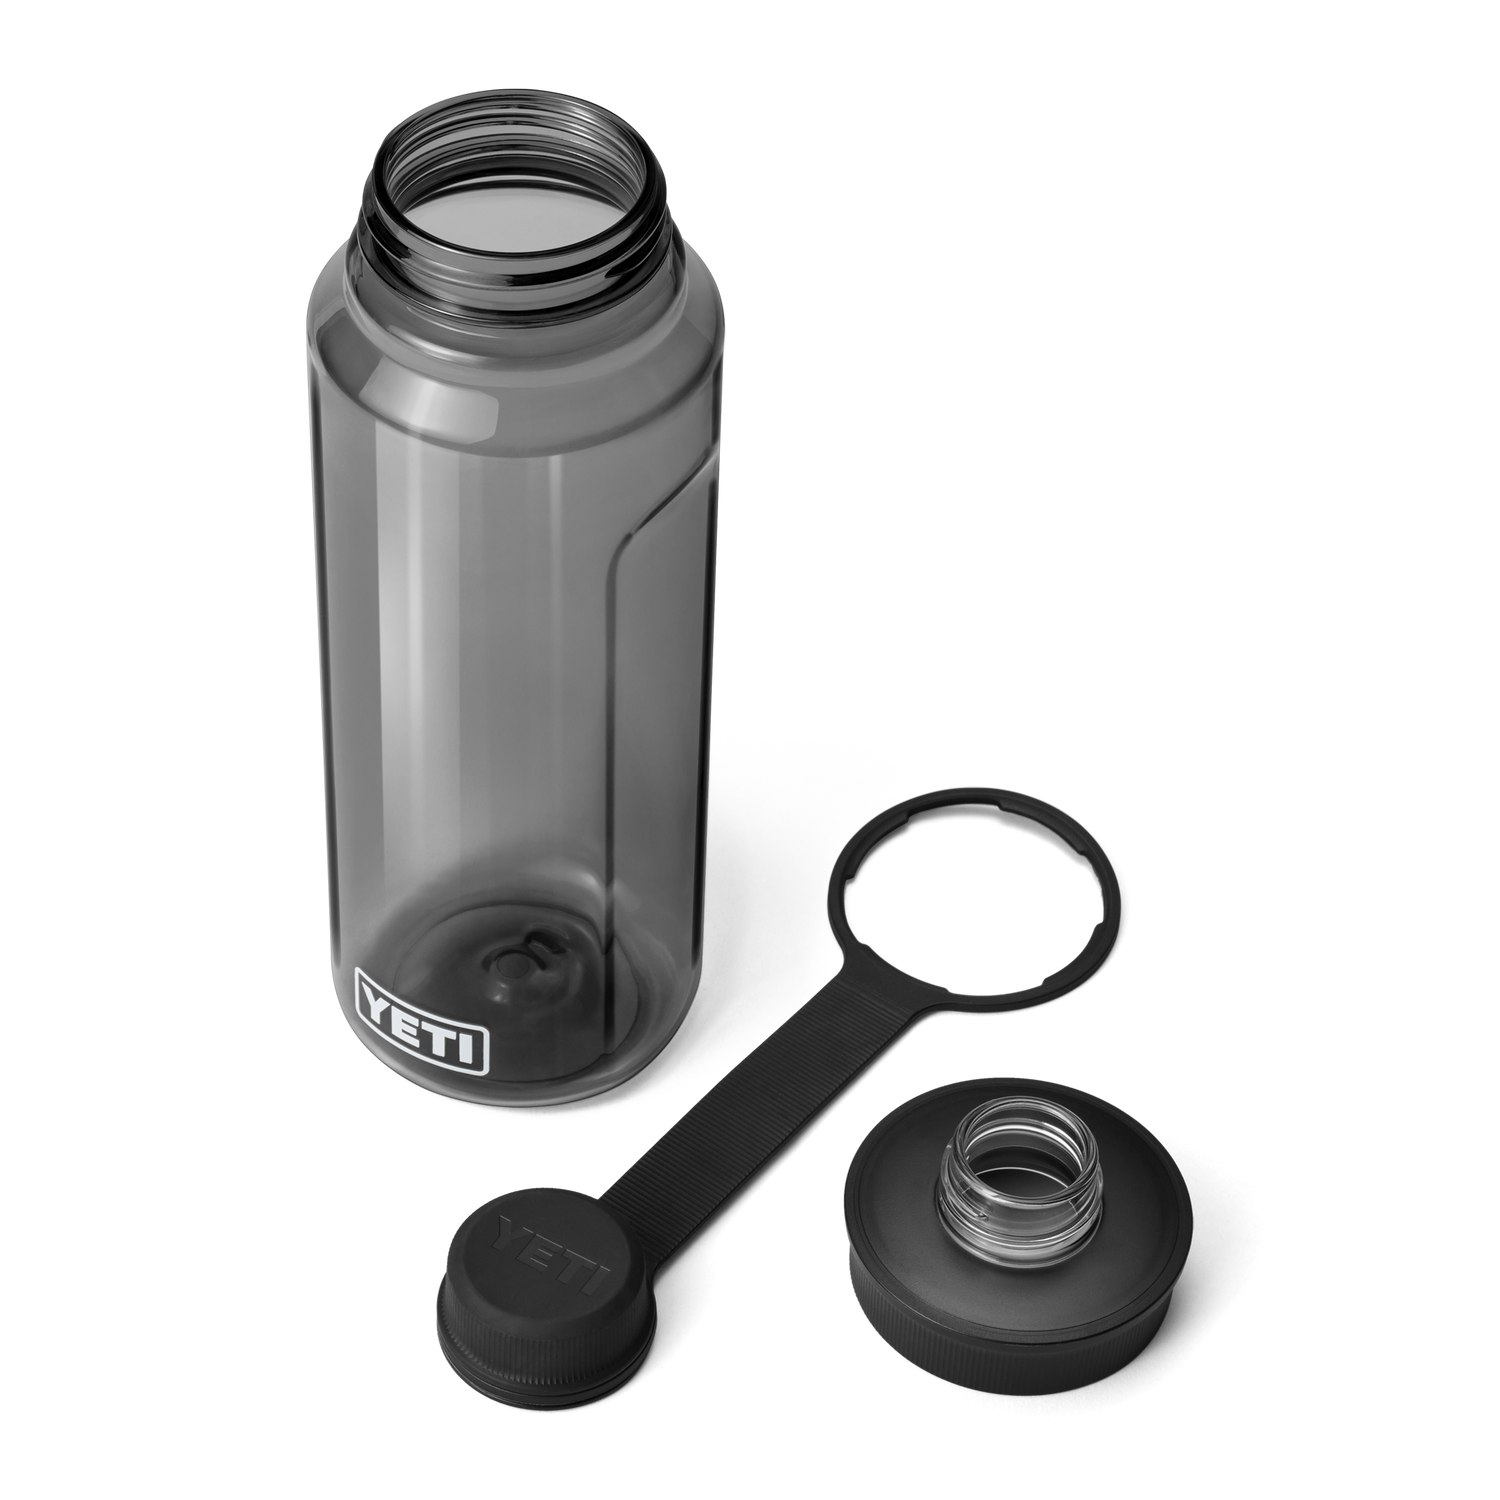 YETI_Wholesale_Drinkware_Yonder_Tether_Accs_1L_Charcoal_3qtr_Chug_Lid_Off_0888_B_2400x2400.png